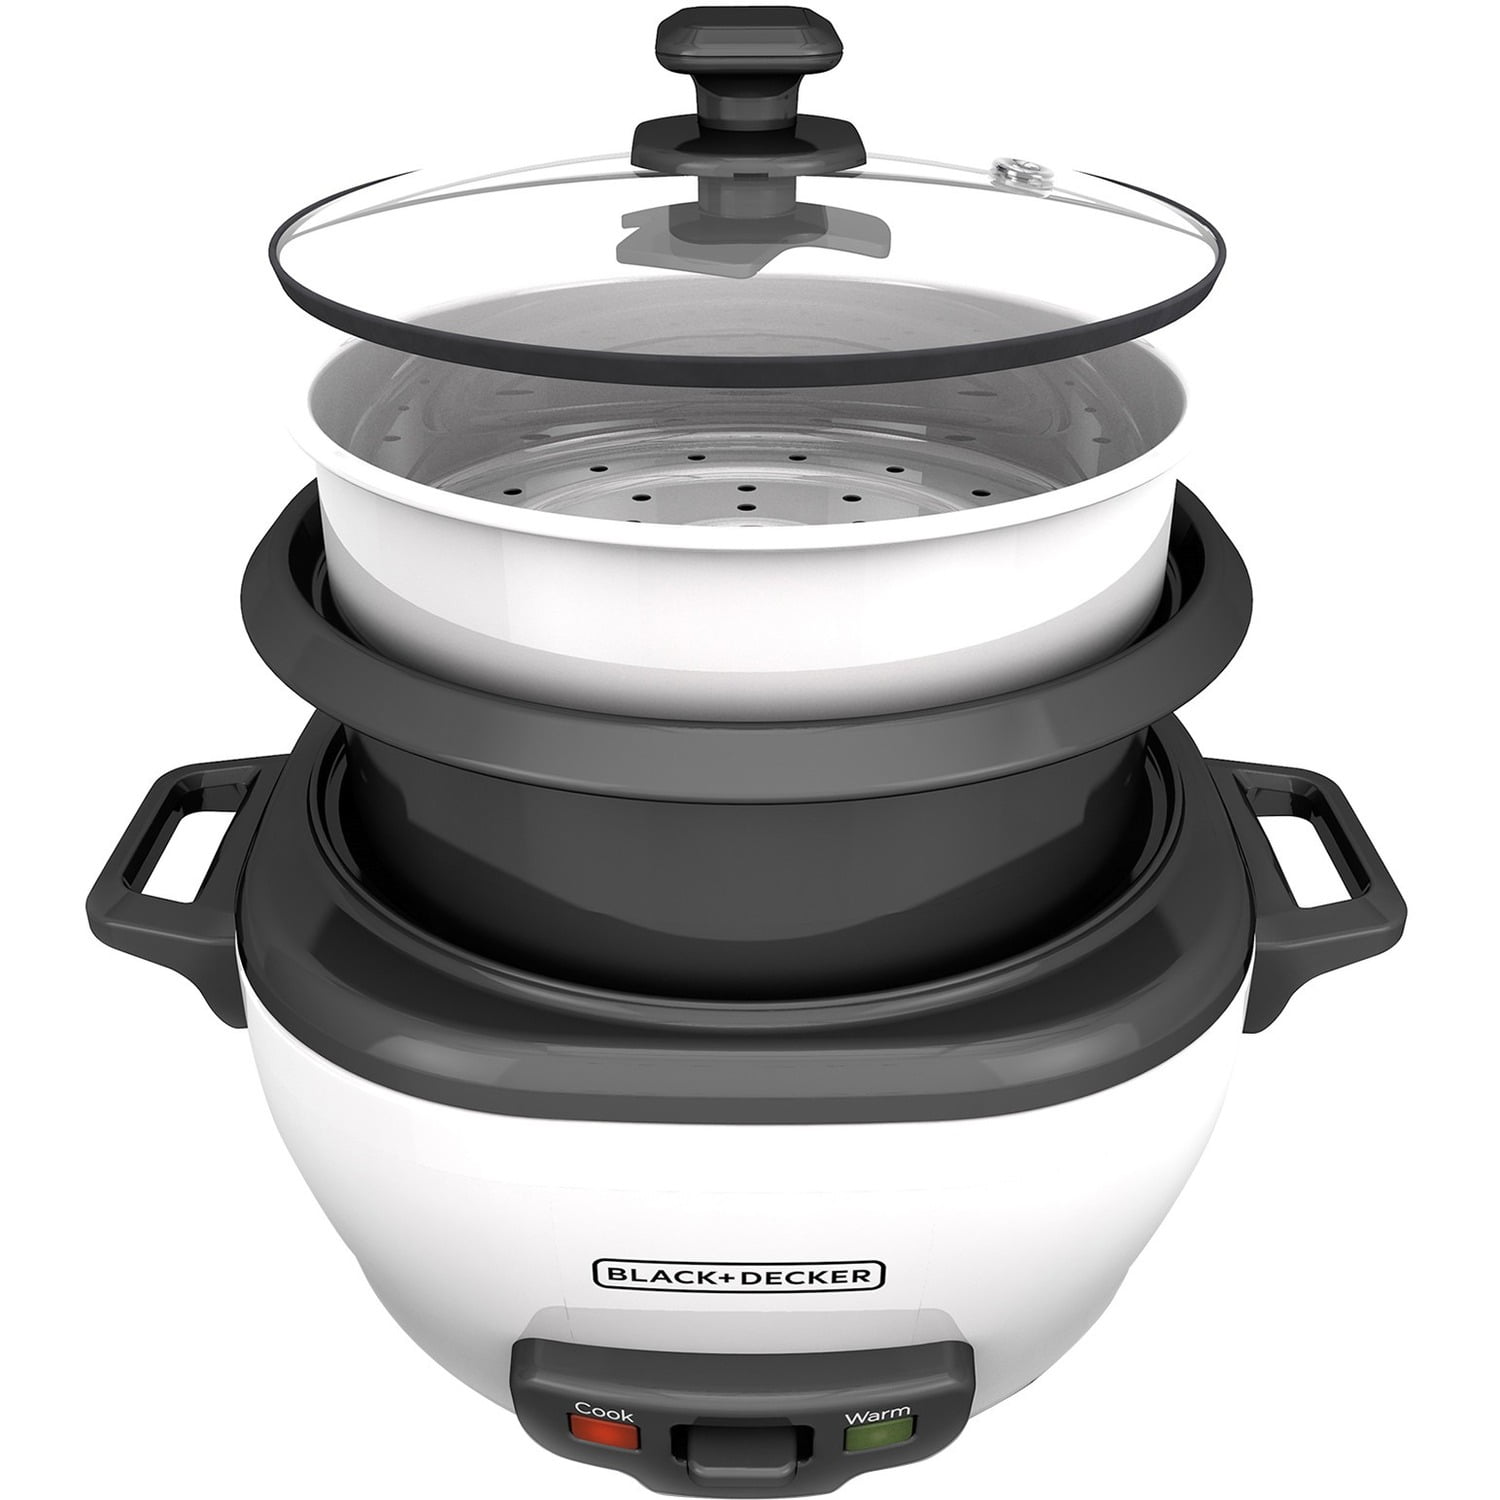 BLACK+DECKER 3-Cup Electric Rice Cooker with Keep-Warm Function -  appliances - by owner - sale - craigslist